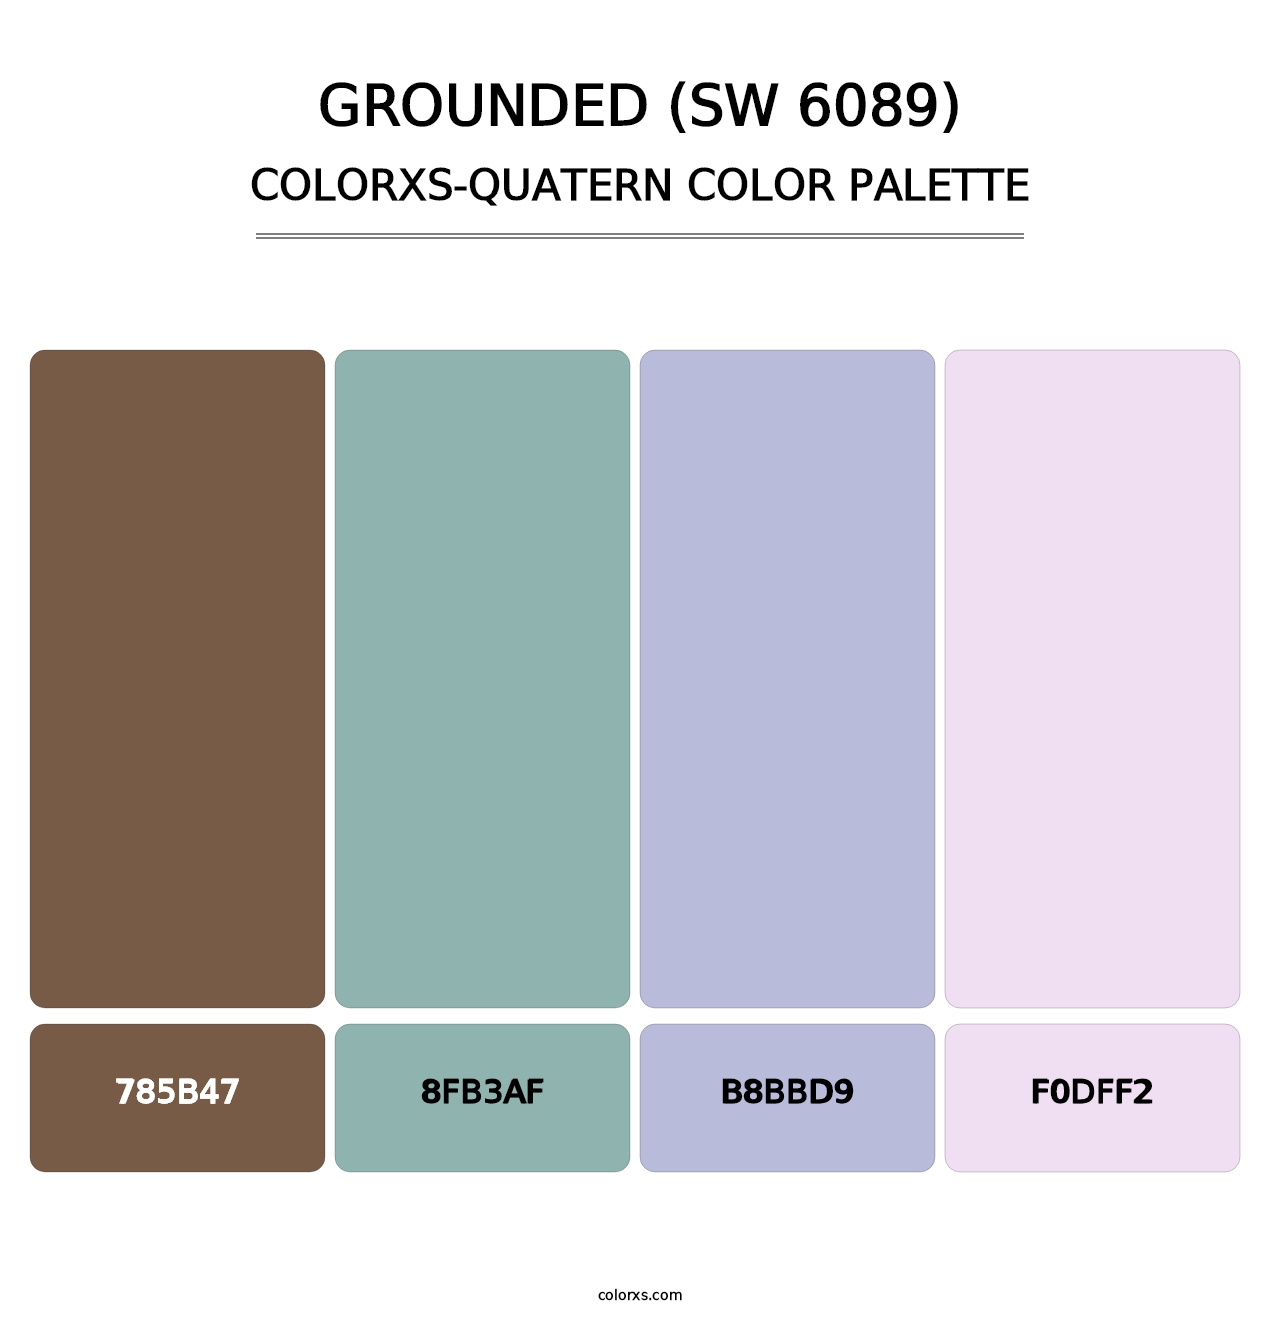 Grounded (SW 6089) - Colorxs Quatern Palette